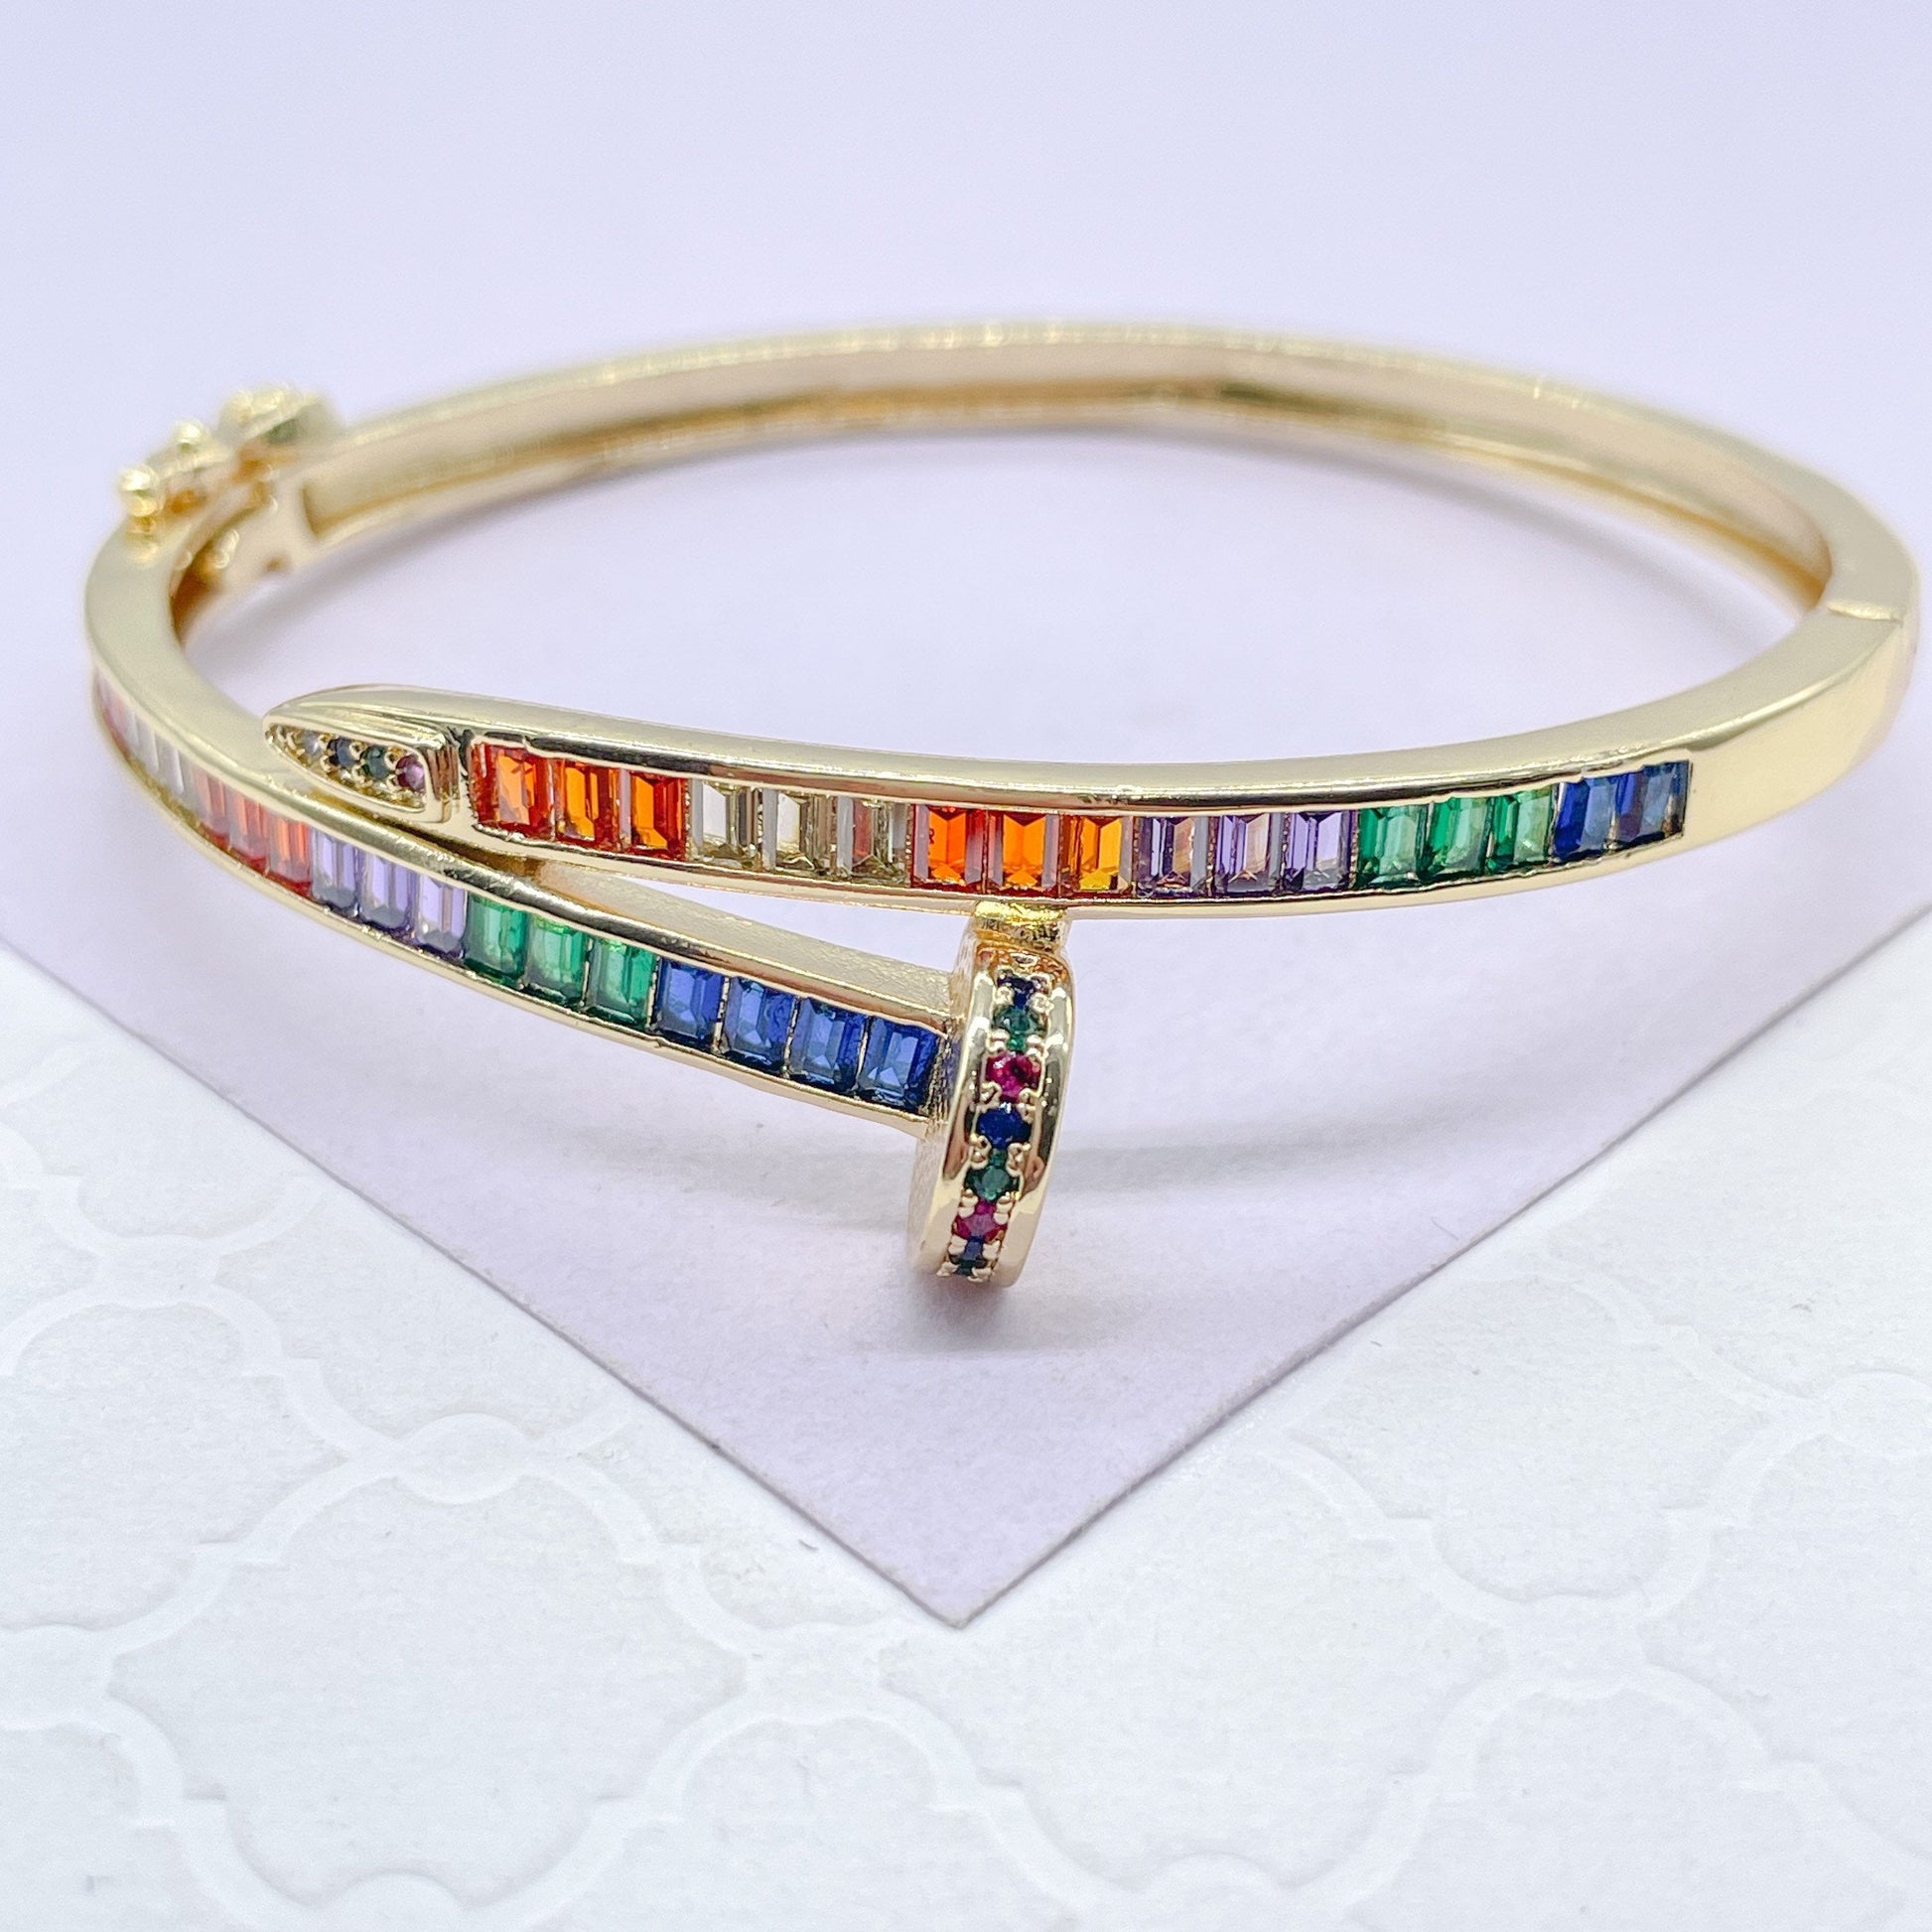 18k GoldFilled Nail Structure Cuff Bracelet with Colorful Baguette Stones